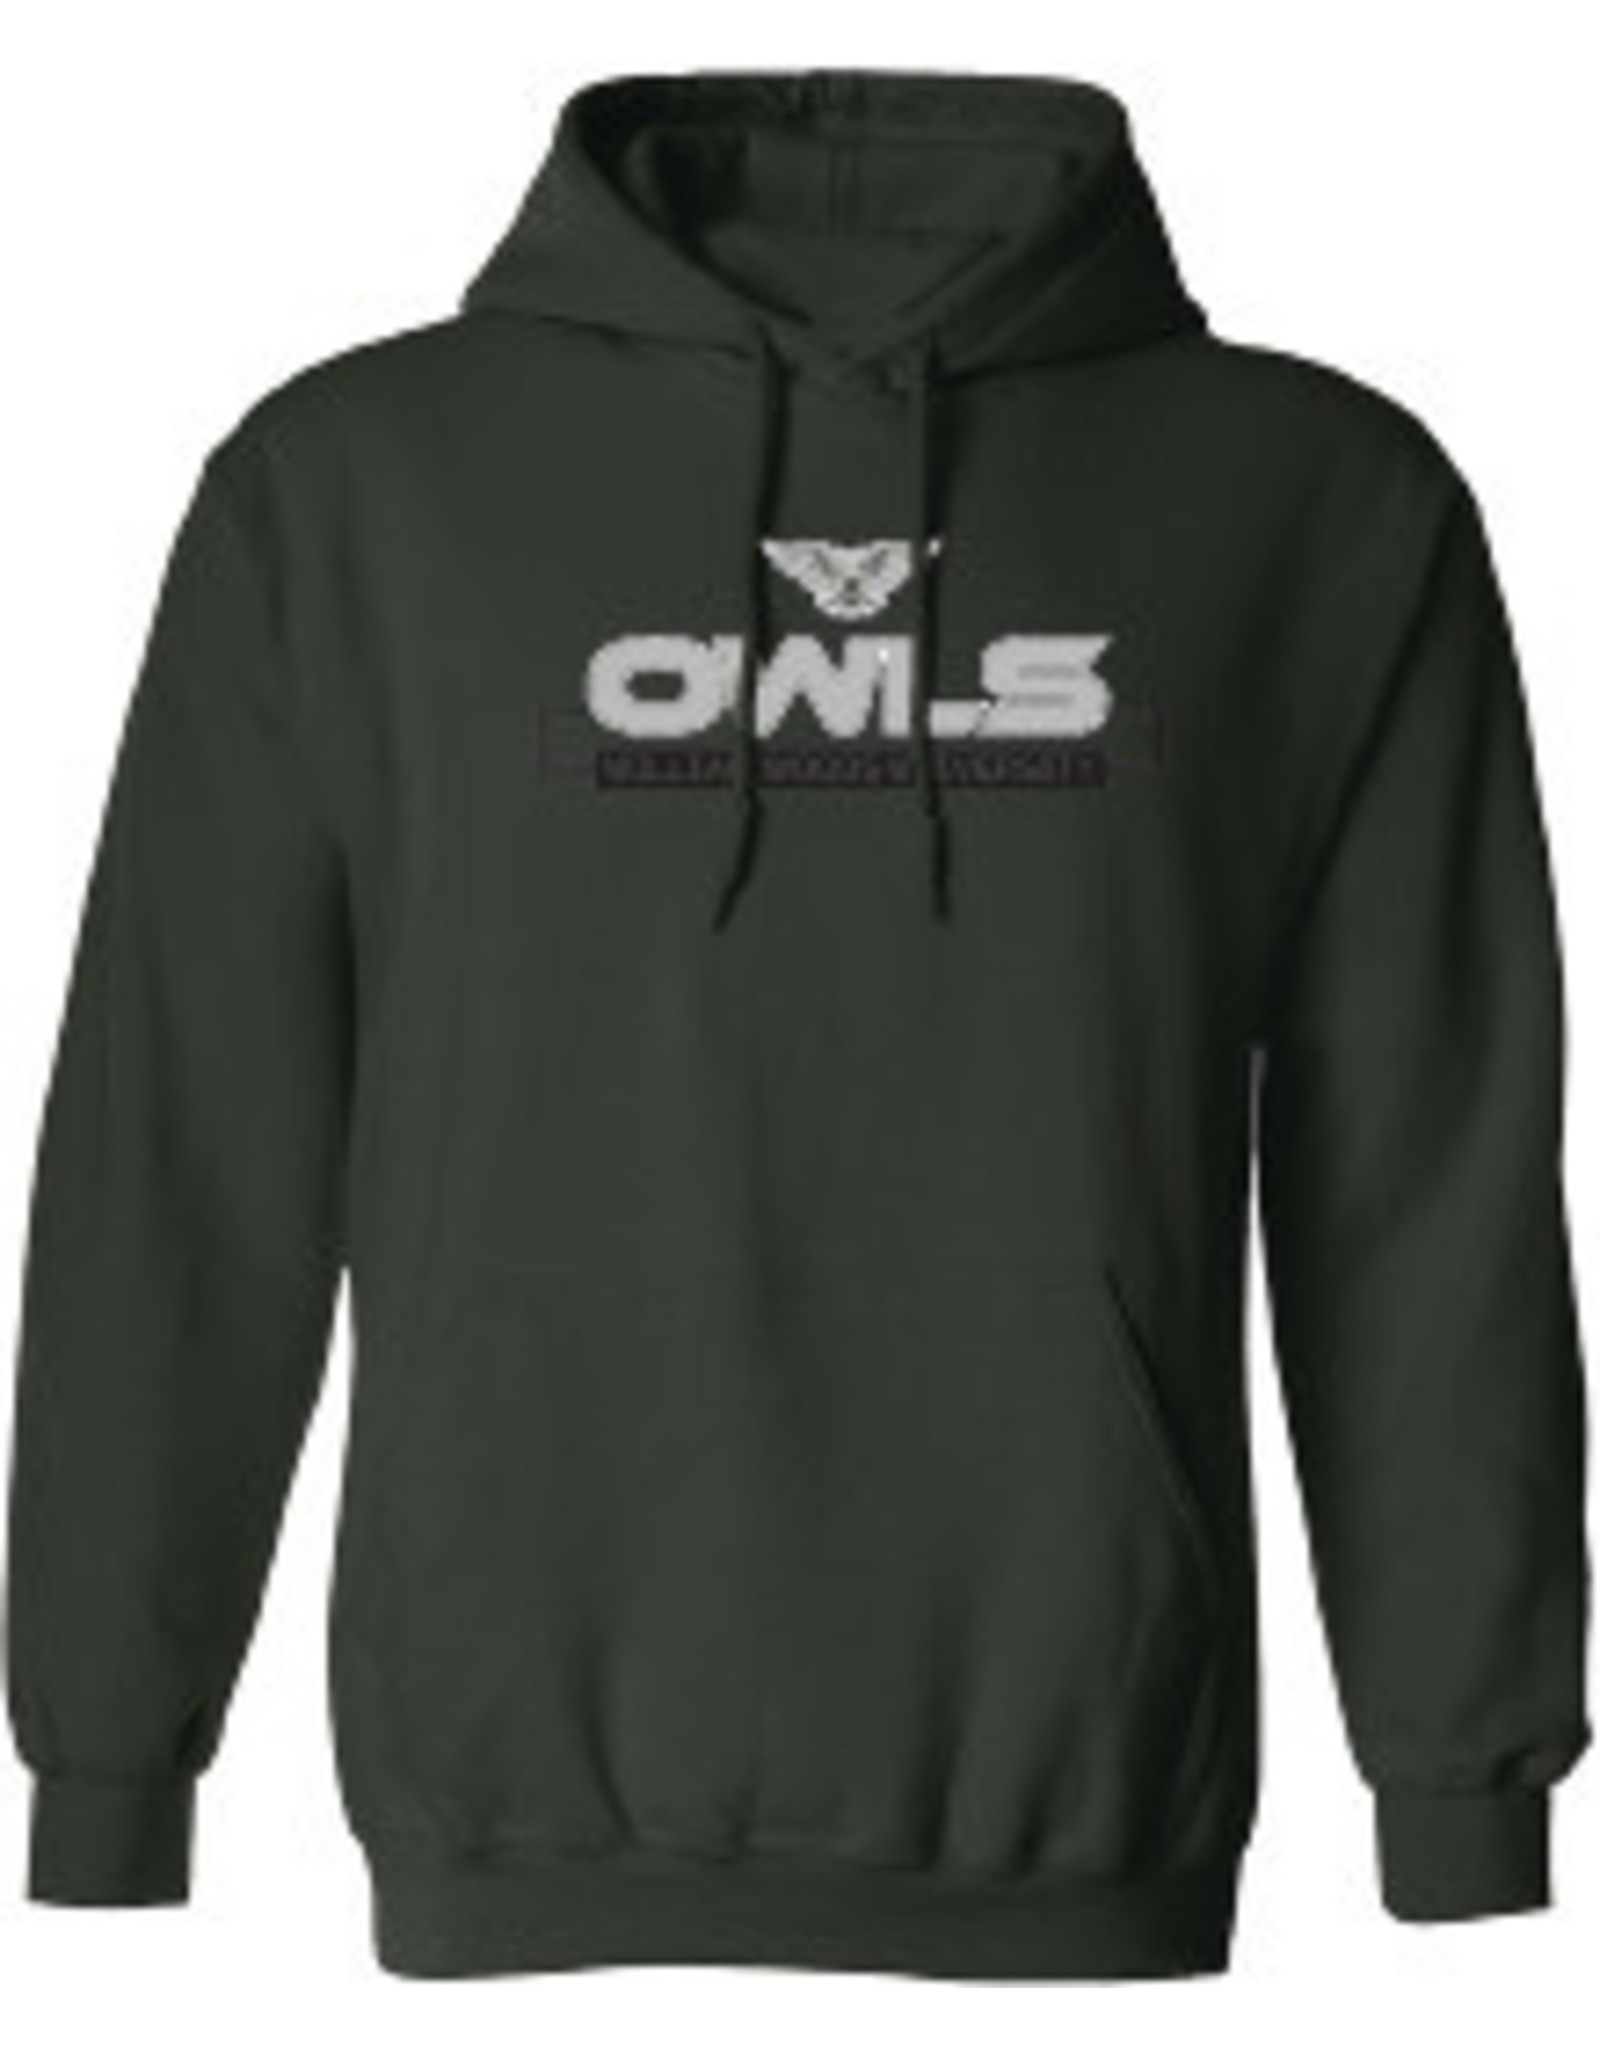 College House WWU Owls forest green hoodie